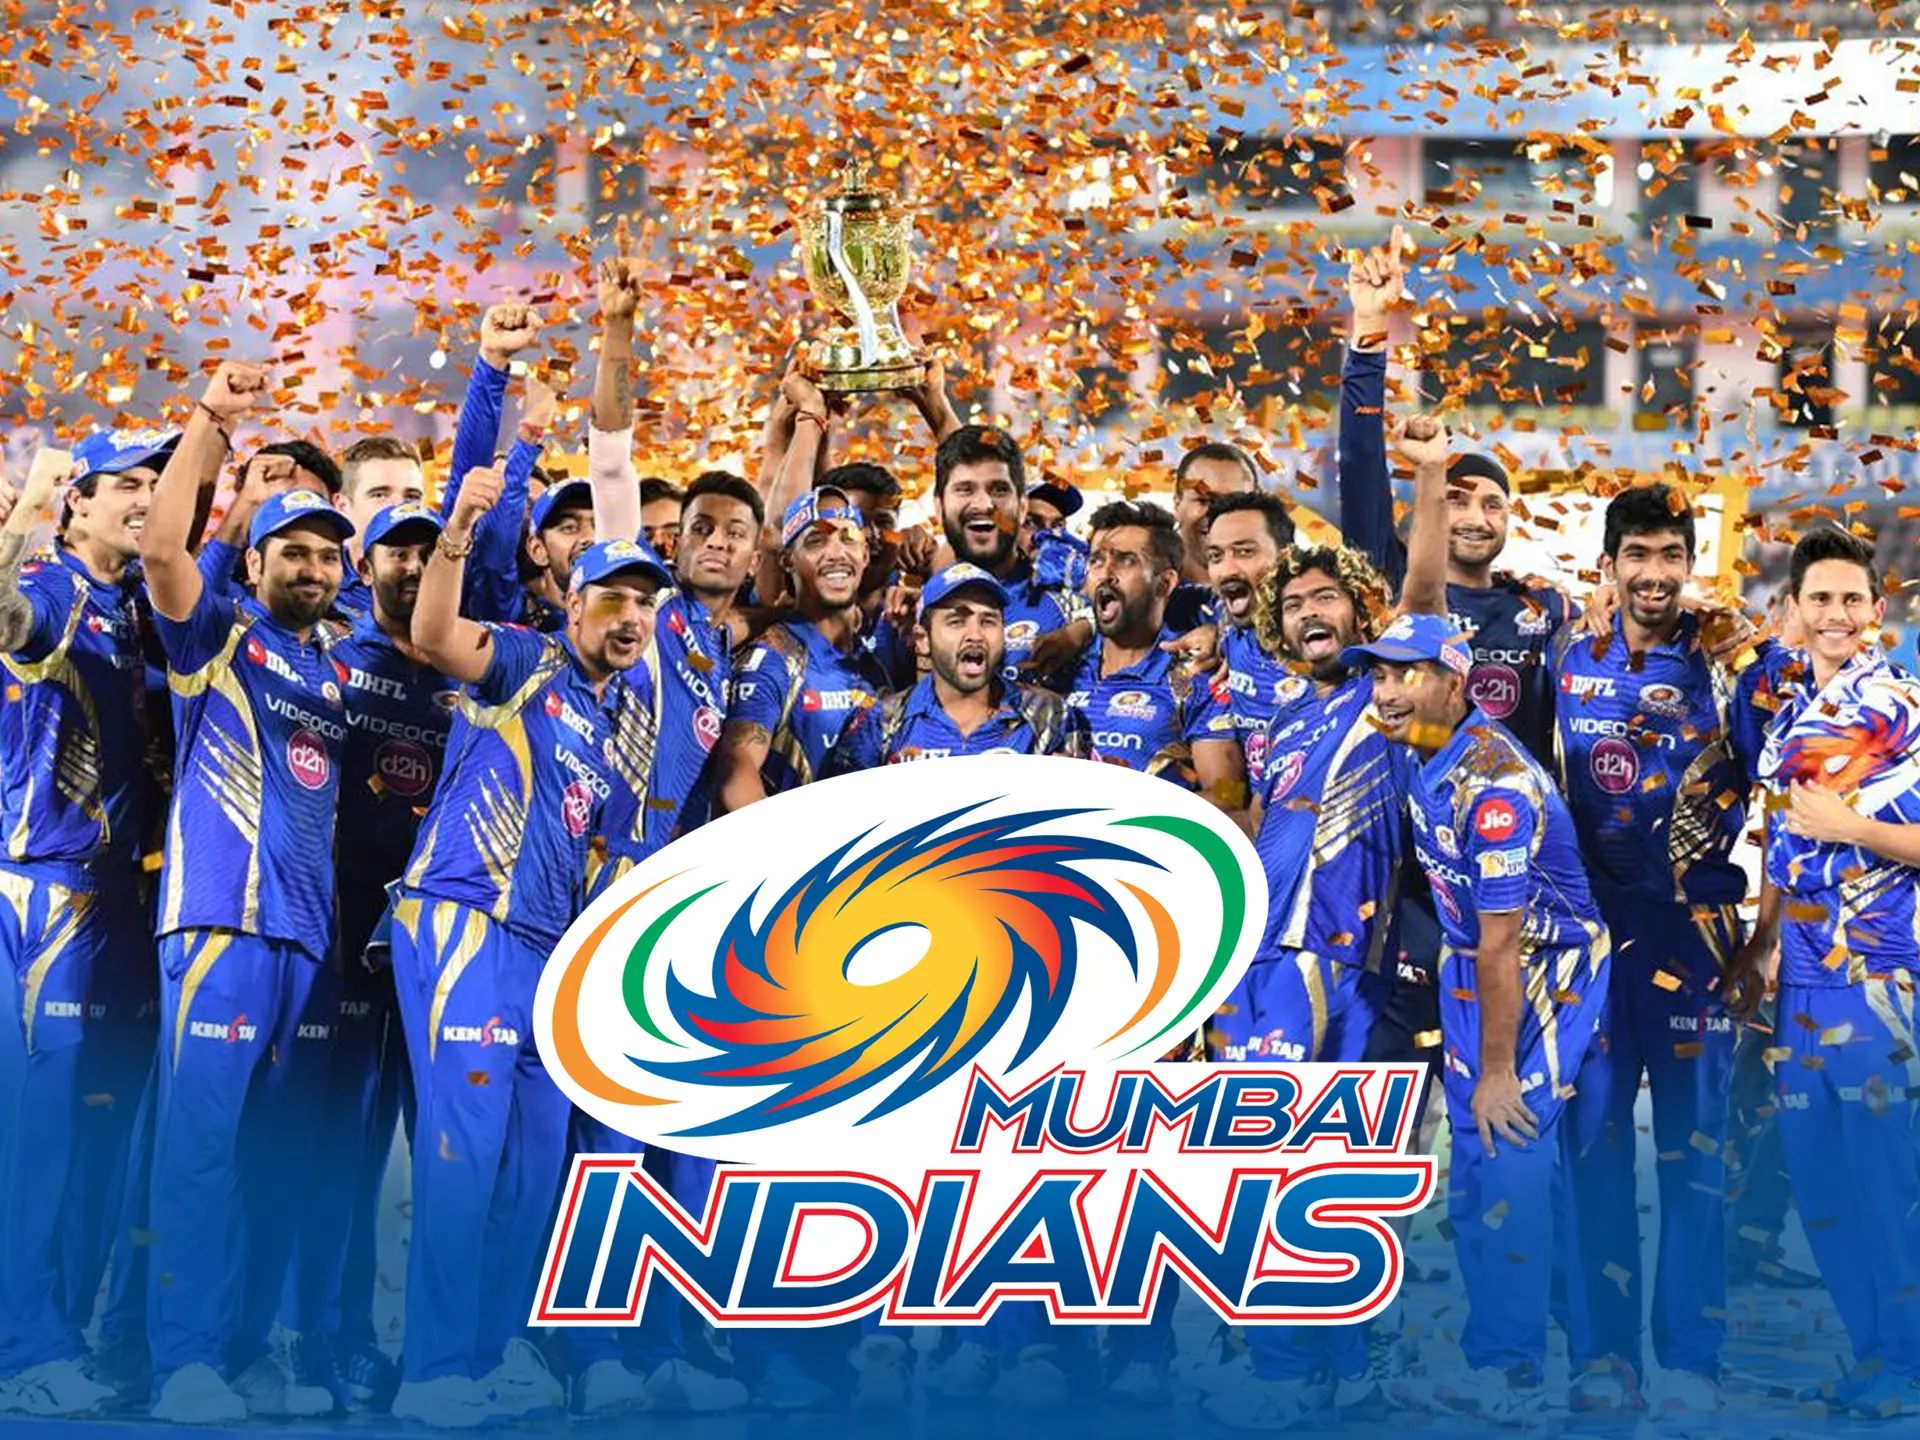 Mumbai Indians is a great team for watch them play.